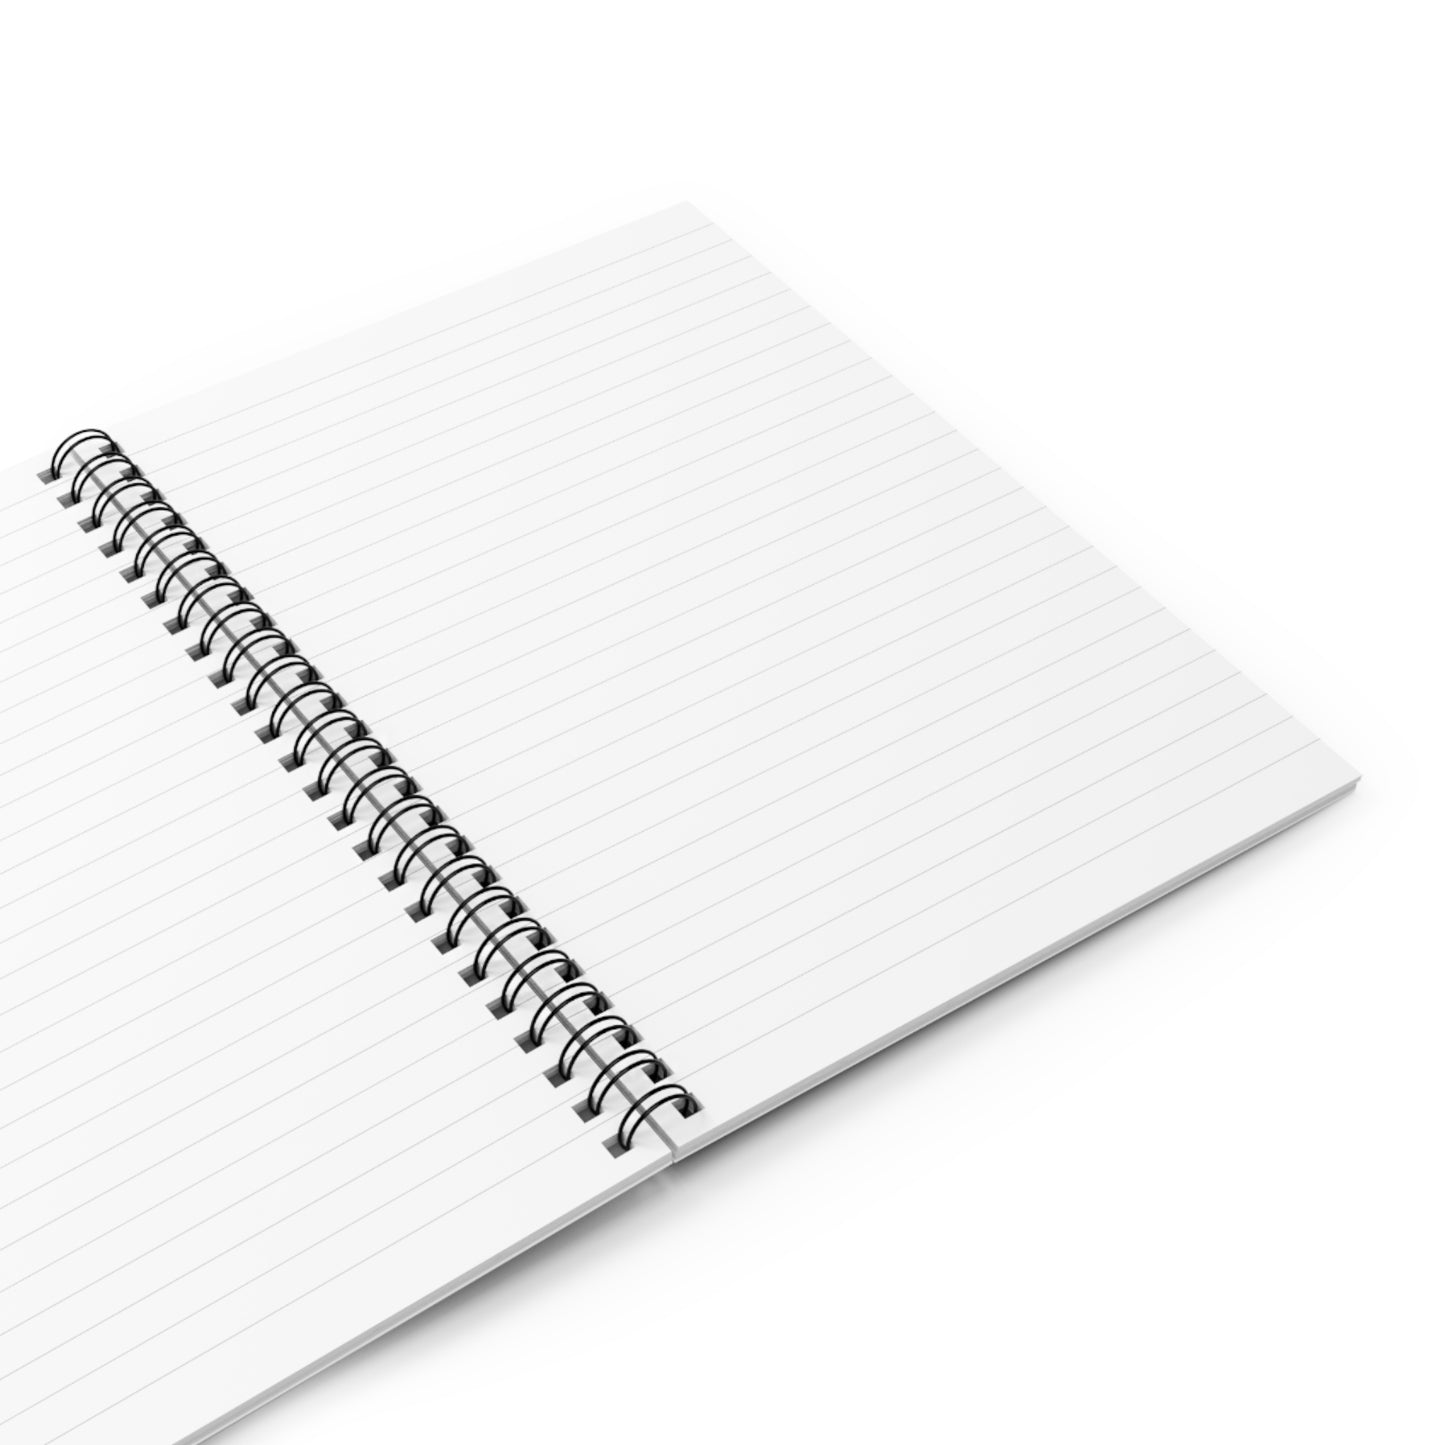 Arch Spiral Notebook - Ruled Line